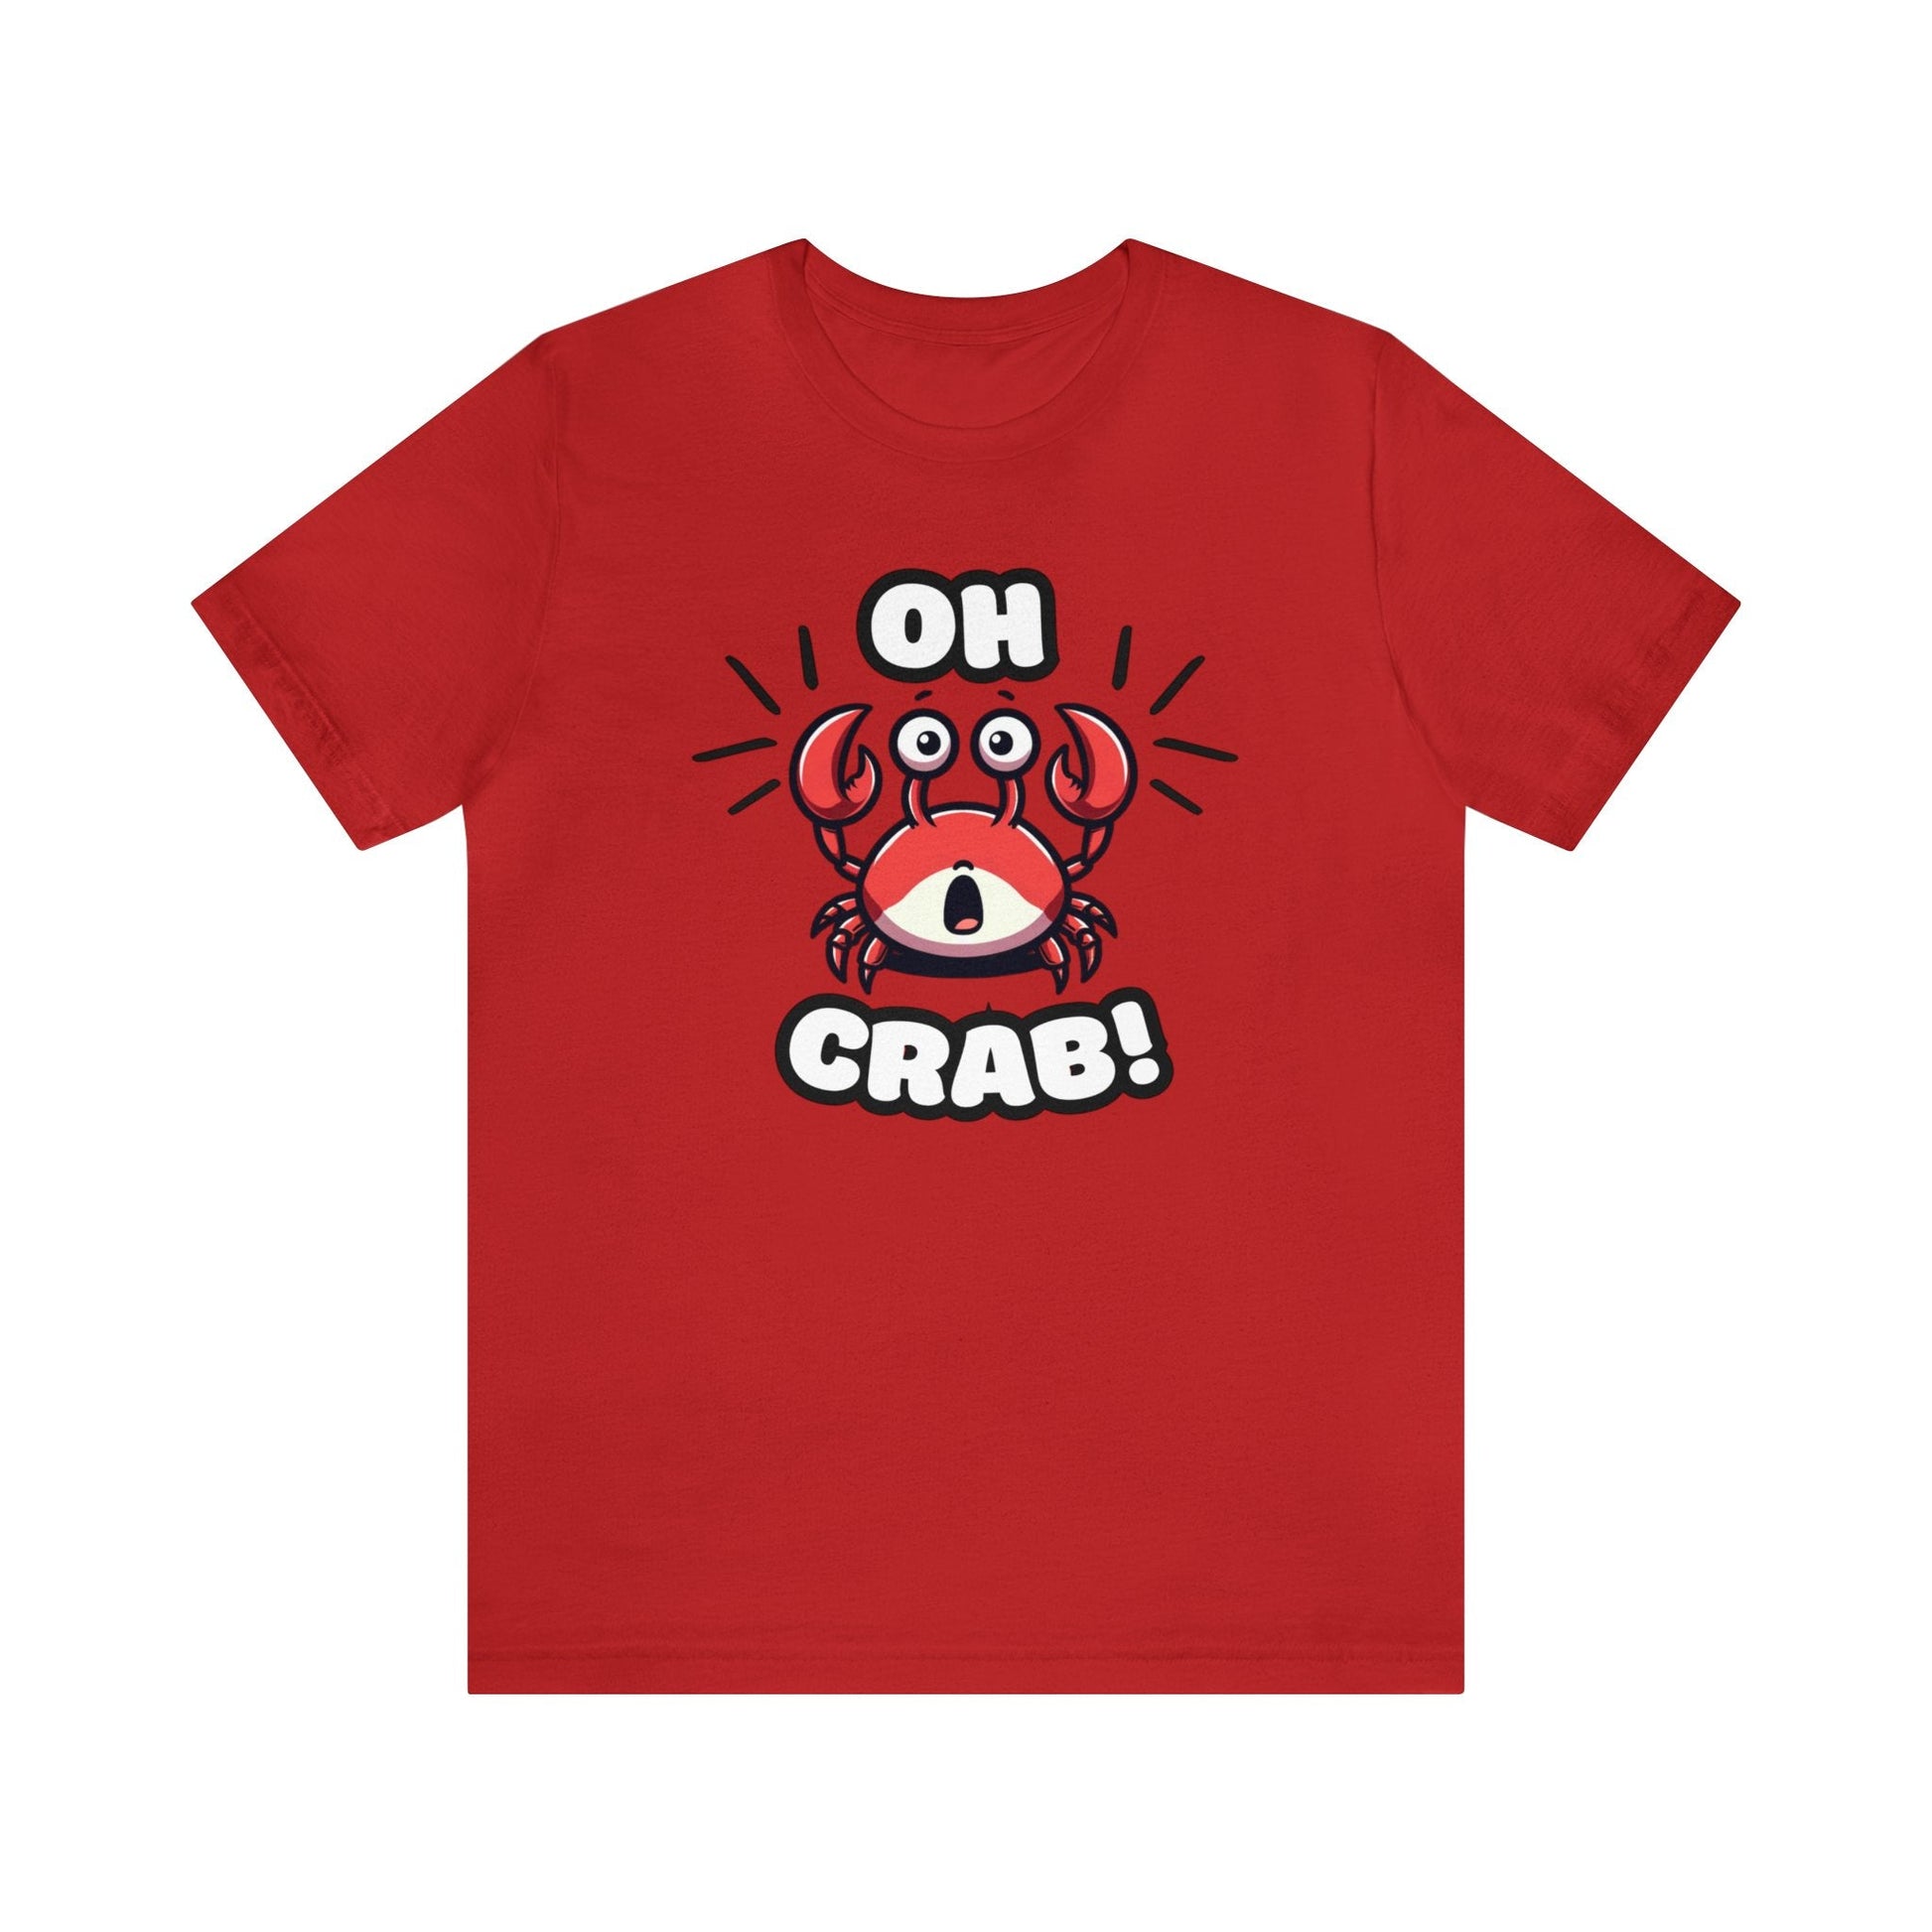 Oh Crab! - Crab T-shirt Red / XS